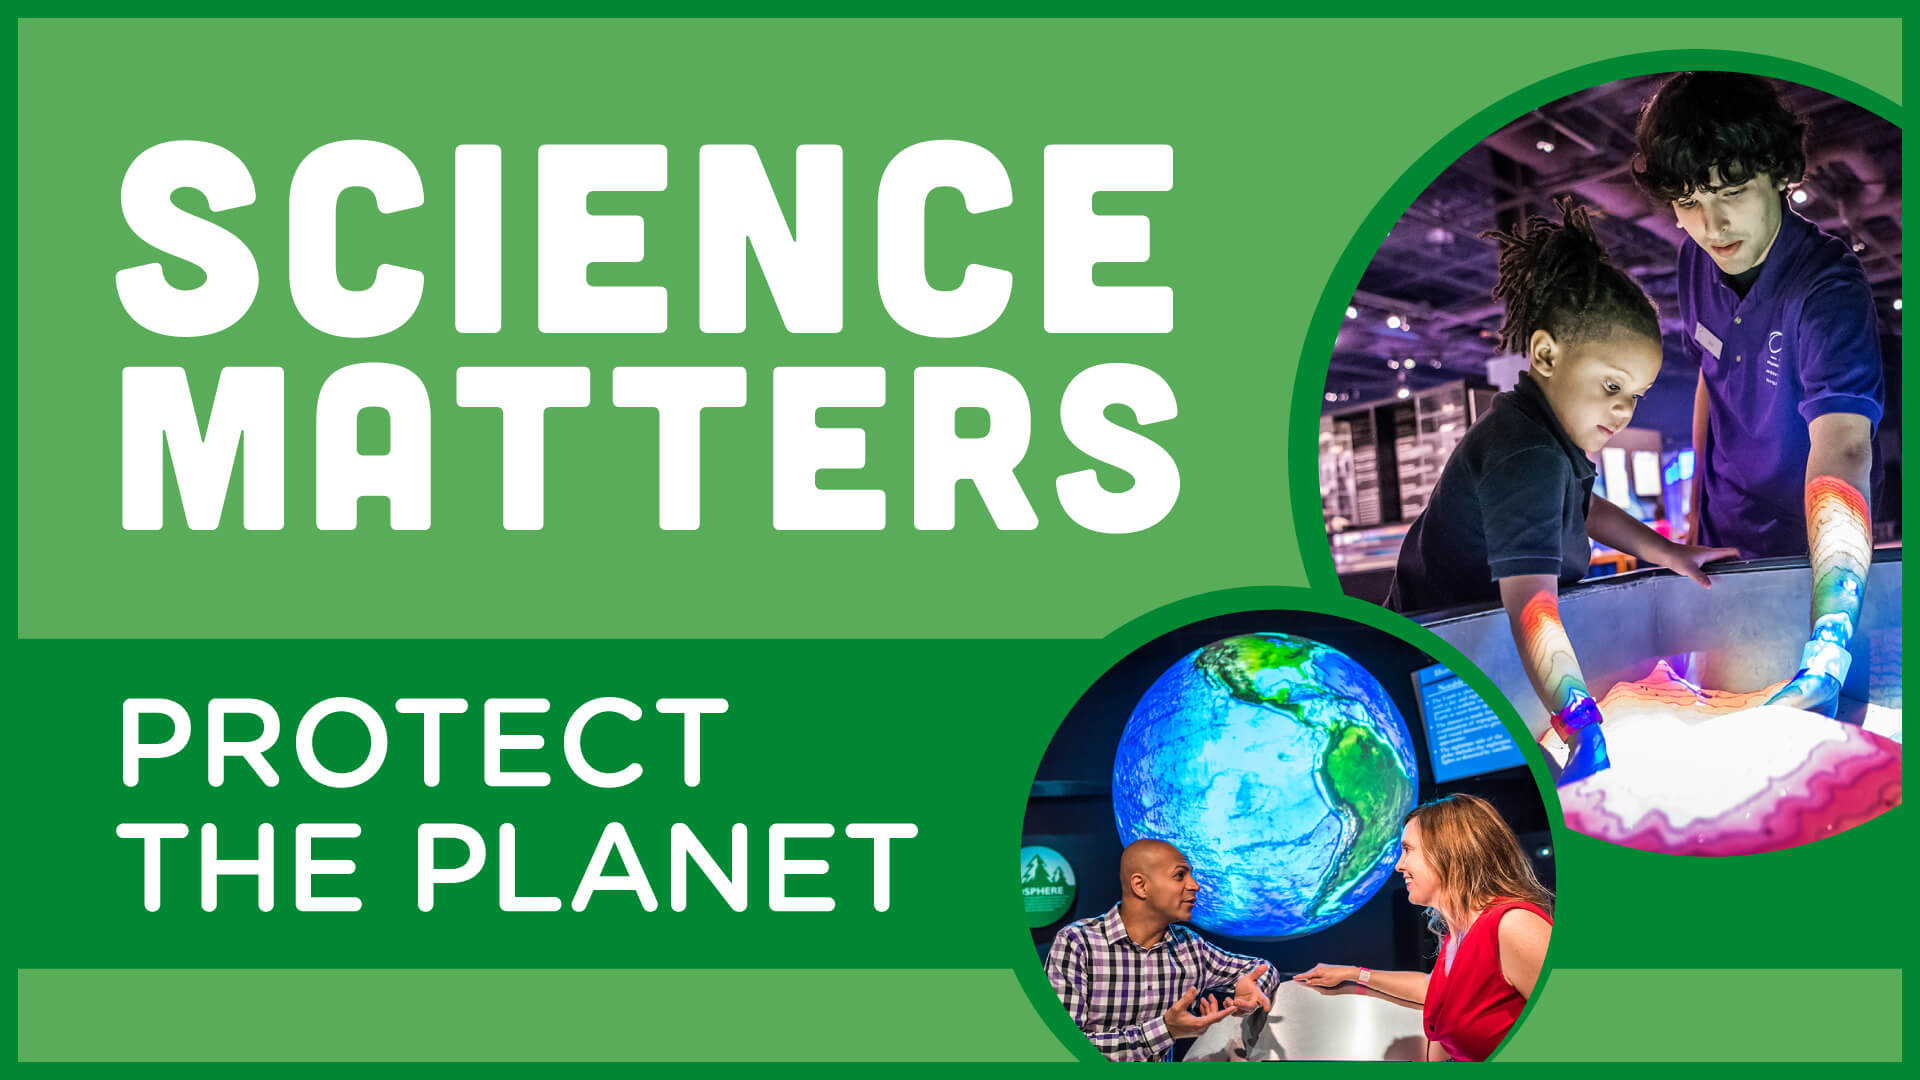 A page header that says "Science Matters: Protect the Planet" and shows people interacting with climate-related exhibits.